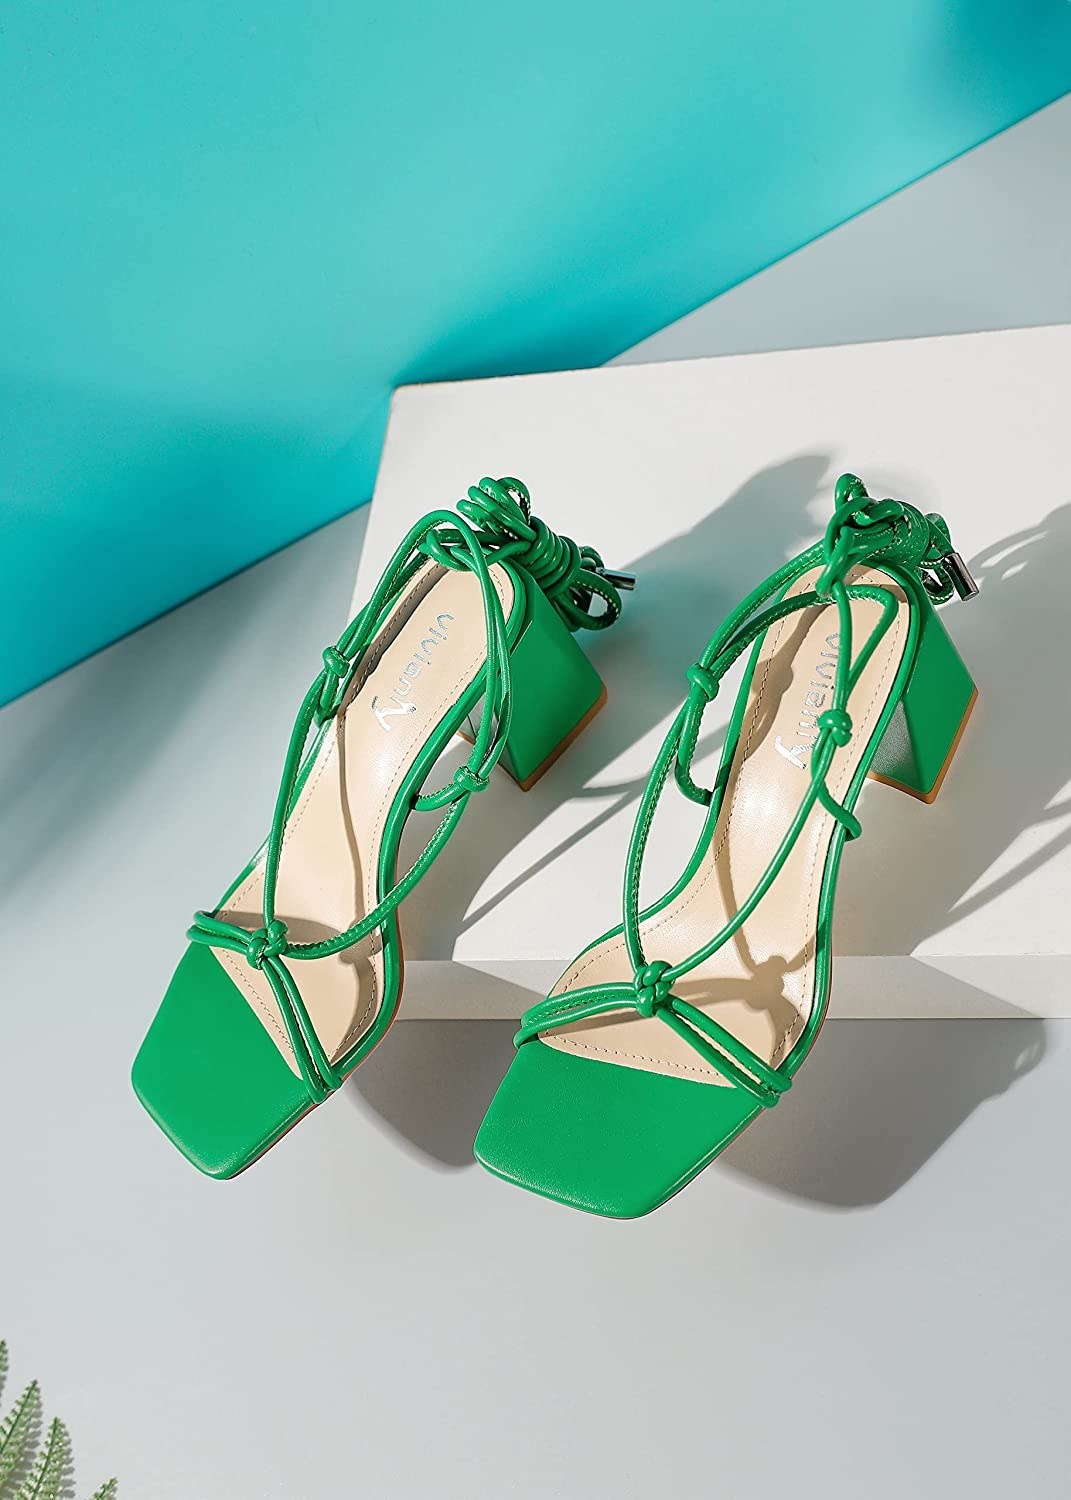 20 Sandals That Have Rave Reviews For A Reason